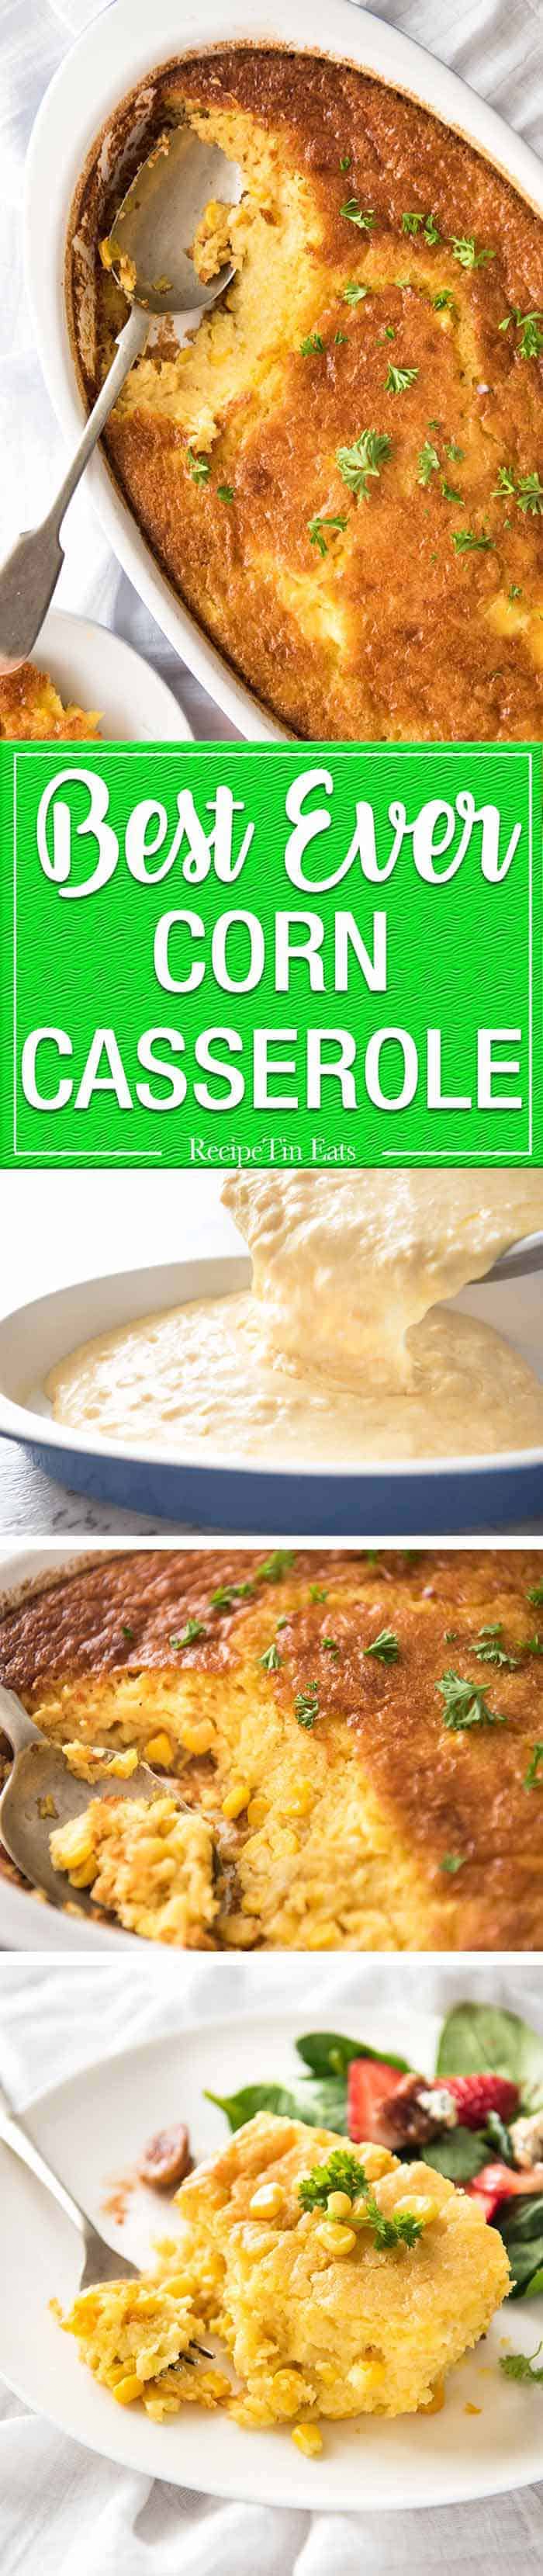 This Creamy Corn Casserole is a fantastic side dish! It's like a cross between corn bread and soufflé. Sweet and savoury, tender and moist inside, with a golden top. Classic Thanksgiving side dish! recipetineats.com